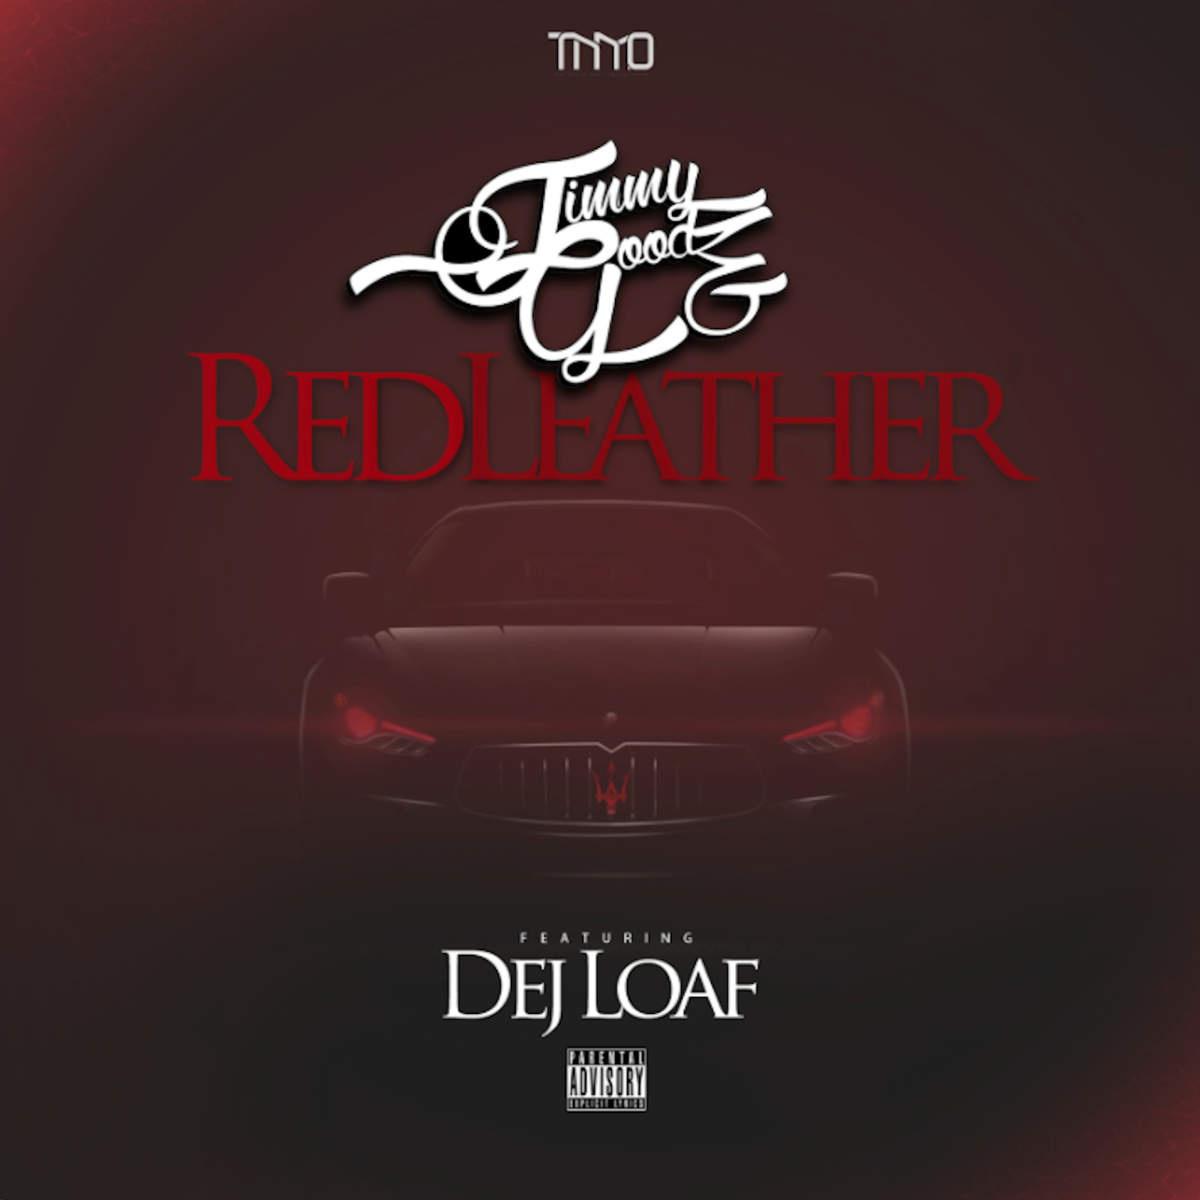 Red Leather (feat. Dej Loaf) 专辑